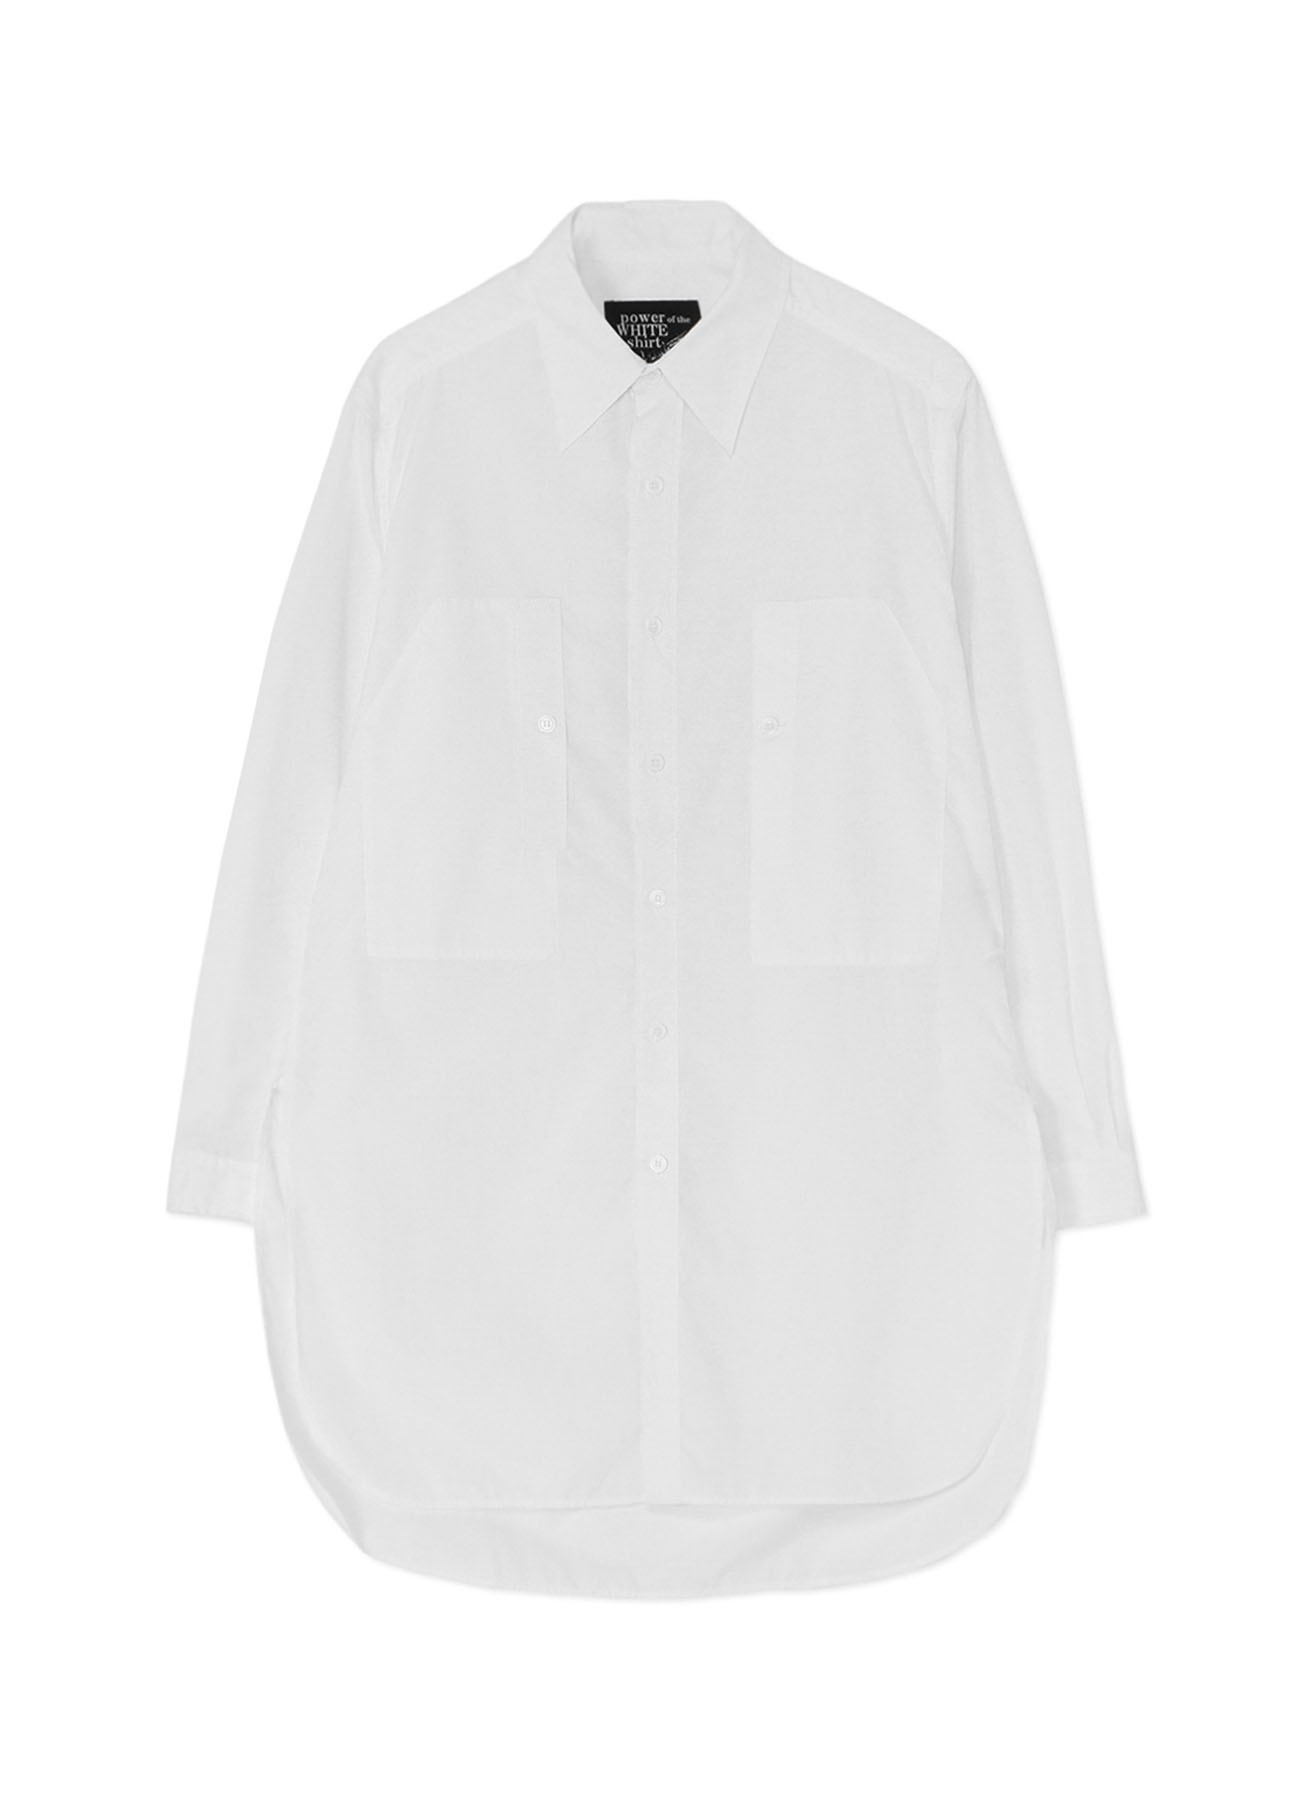 COTTON BROADCLOTH ROUNDED HEM DOUBLE CHEST POCKET SHIRT